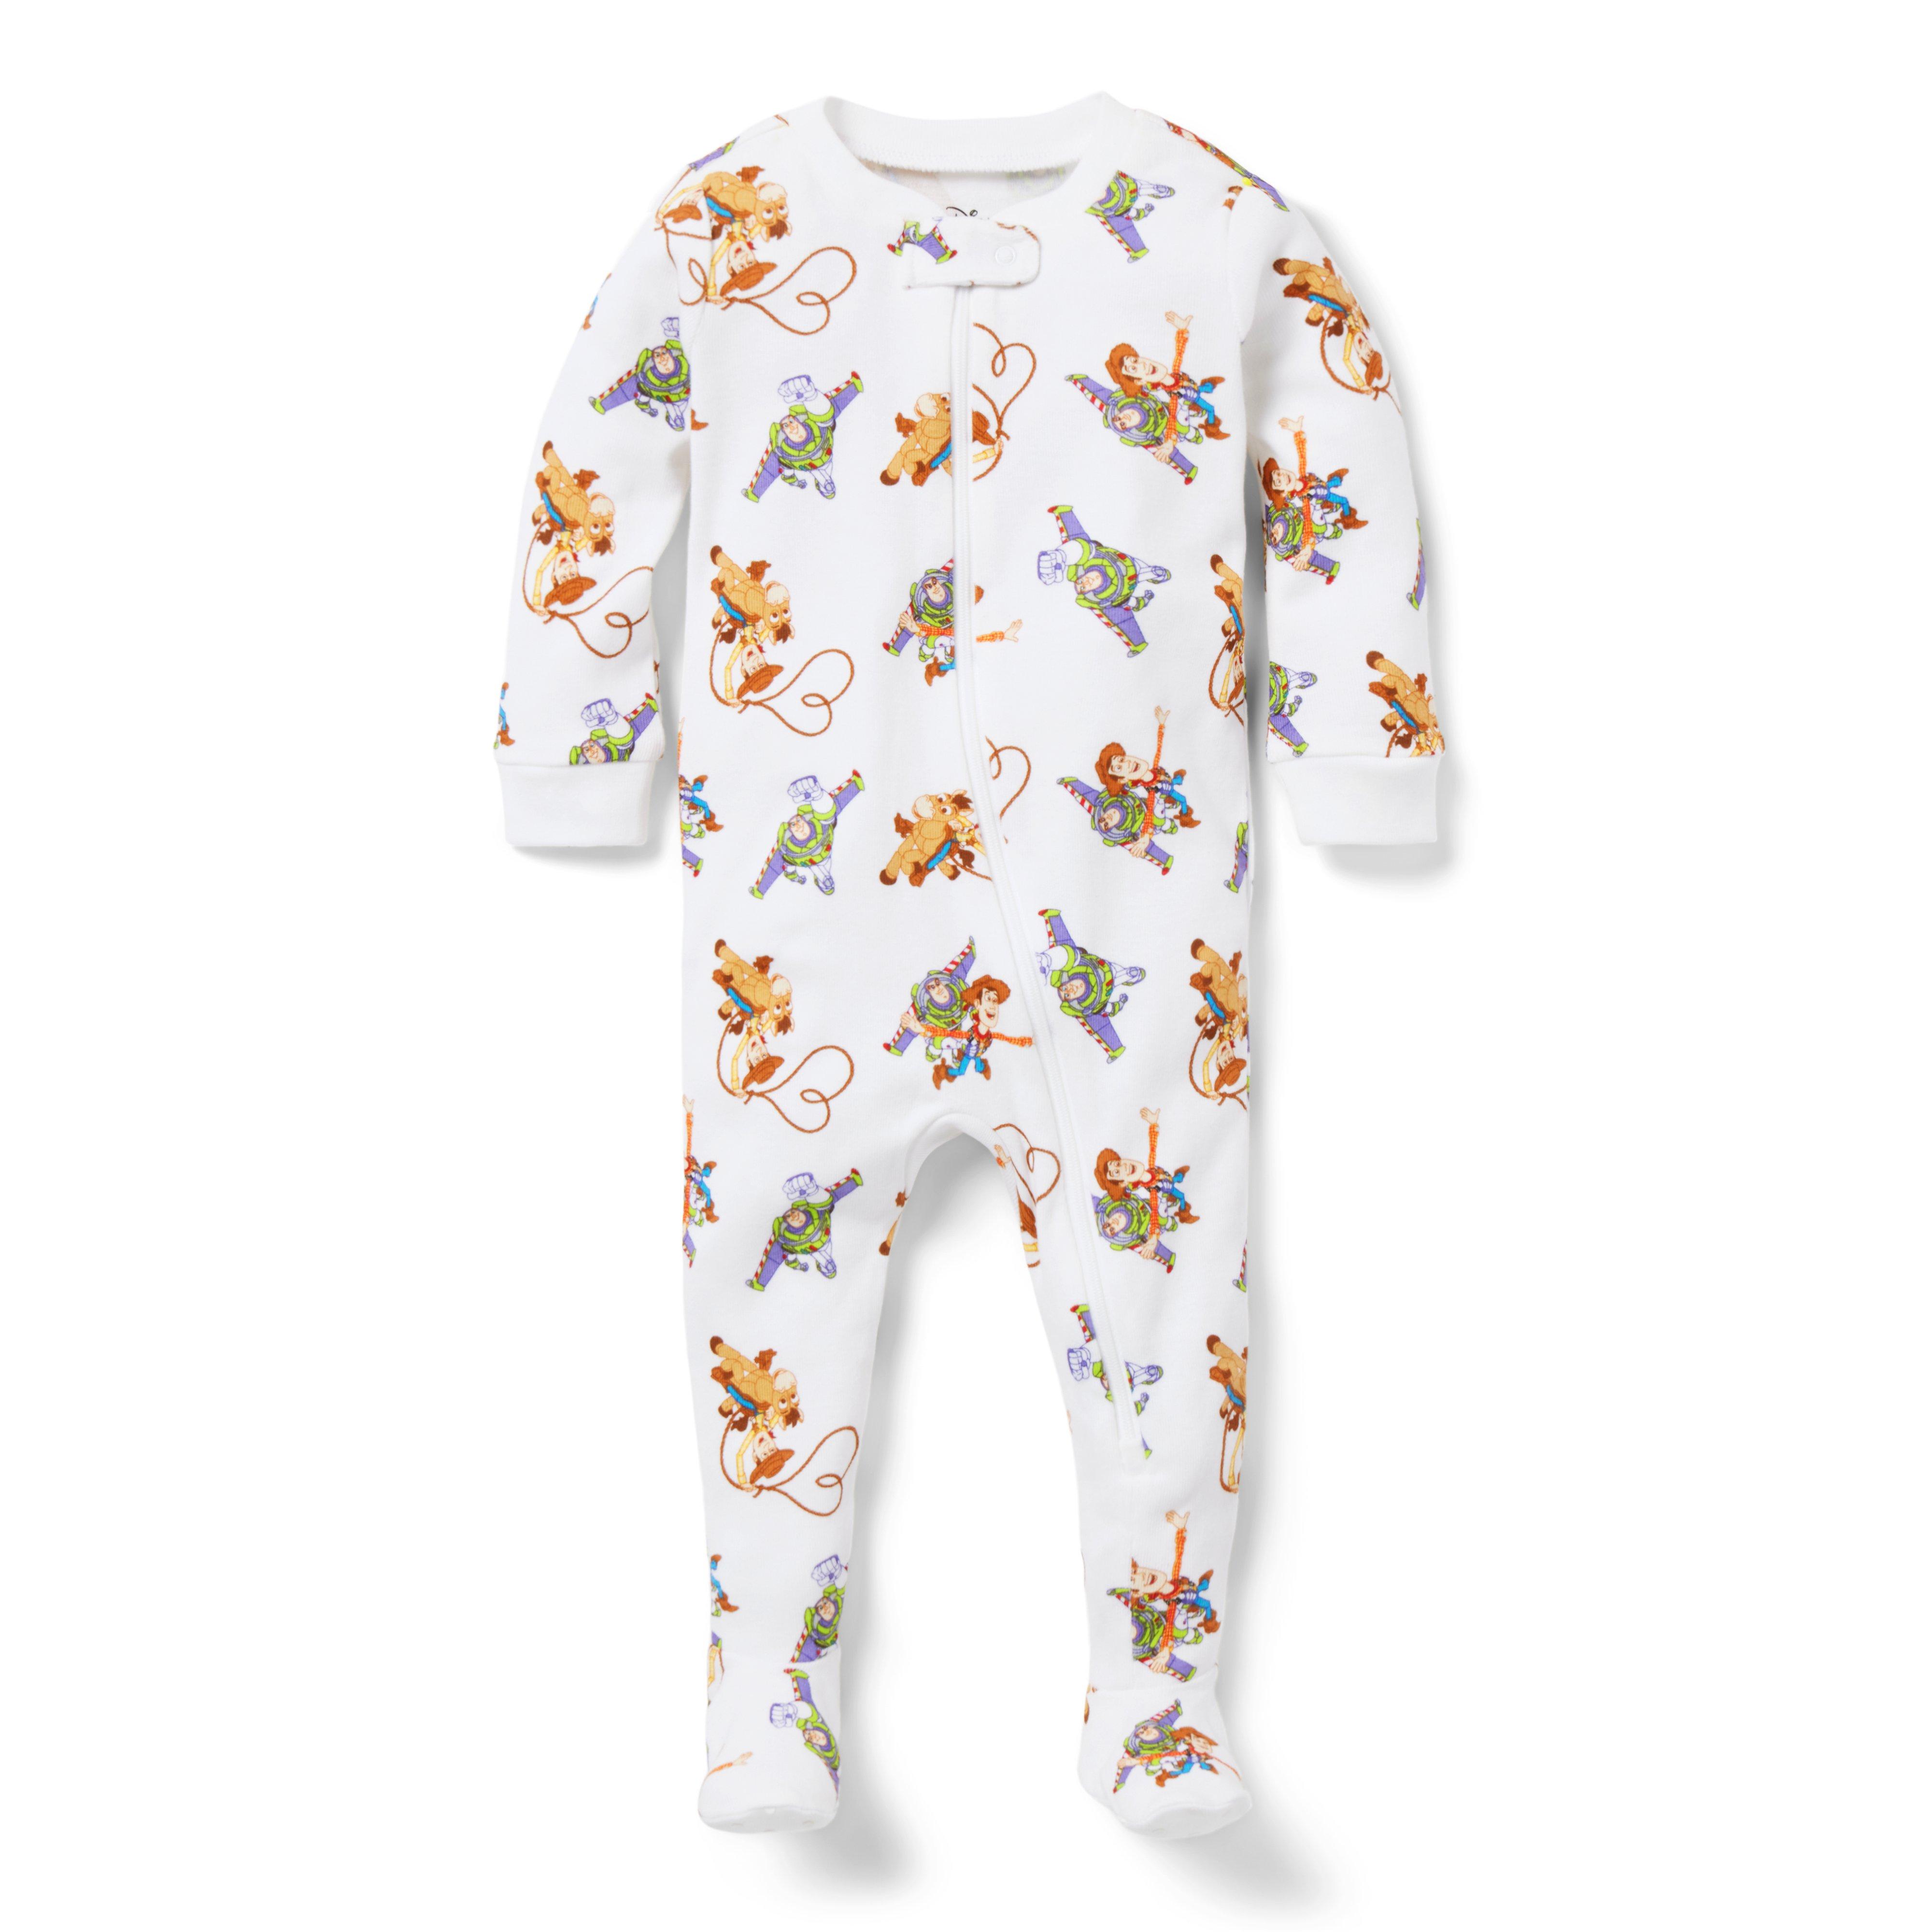 Baby Good Night Footed Pajama in Disney Toy Story